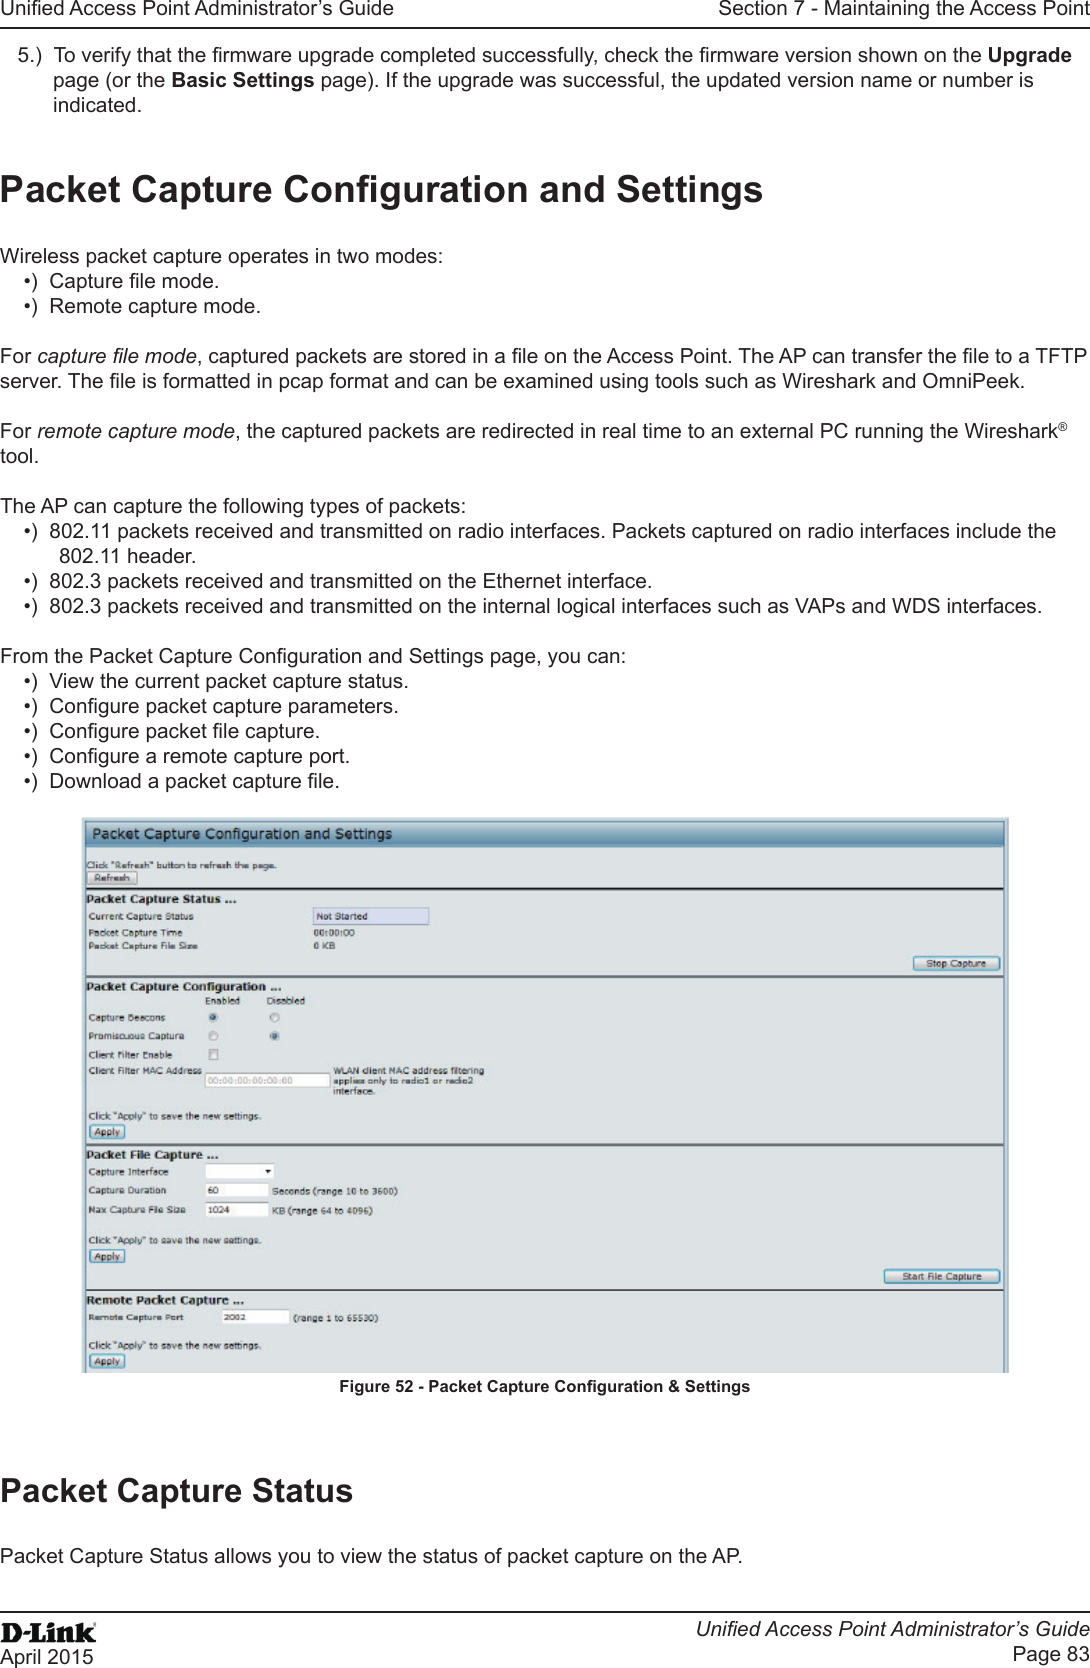 Unied Access Point Administrator’s GuideUnied Access Point Administrator’s GuidePage 83April 2015Section 7 - Maintaining the Access Point5.)  To verify that the rmware upgrade completed successfully, check the rmware version shown on the Upgrade page (or the Basic Settings page). If the upgrade was successful, the updated version name or number is indicated.Packet Capture Conguration and SettingsWireless packet capture operates in two modes:•)  Capture le mode.•)  Remote capture mode.For capture le mode, captured packets are stored in a le on the Access Point. The AP can transfer the le to a TFTP server. The le is formatted in pcap format and can be examined using tools such as Wireshark and OmniPeek.For remote capture mode, the captured packets are redirected in real time to an external PC running the Wireshark® tool.The AP can capture the following types of packets:•)  802.11 packets received and transmitted on radio interfaces. Packets captured on radio interfaces include the 802.11 header.•)  802.3 packets received and transmitted on the Ethernet interface.•)  802.3 packets received and transmitted on the internal logical interfaces such as VAPs and WDS interfaces.From the Packet Capture Conguration and Settings page, you can:•)  View the current packet capture status.•)  Congure packet capture parameters.•)  Congure packet le capture.•)  Congure a remote capture port.•)  Download a packet capture le.Figure 52 - Packet Capture Conguration &amp; SettingsPacket Capture StatusPacket Capture Status allows you to view the status of packet capture on the AP.